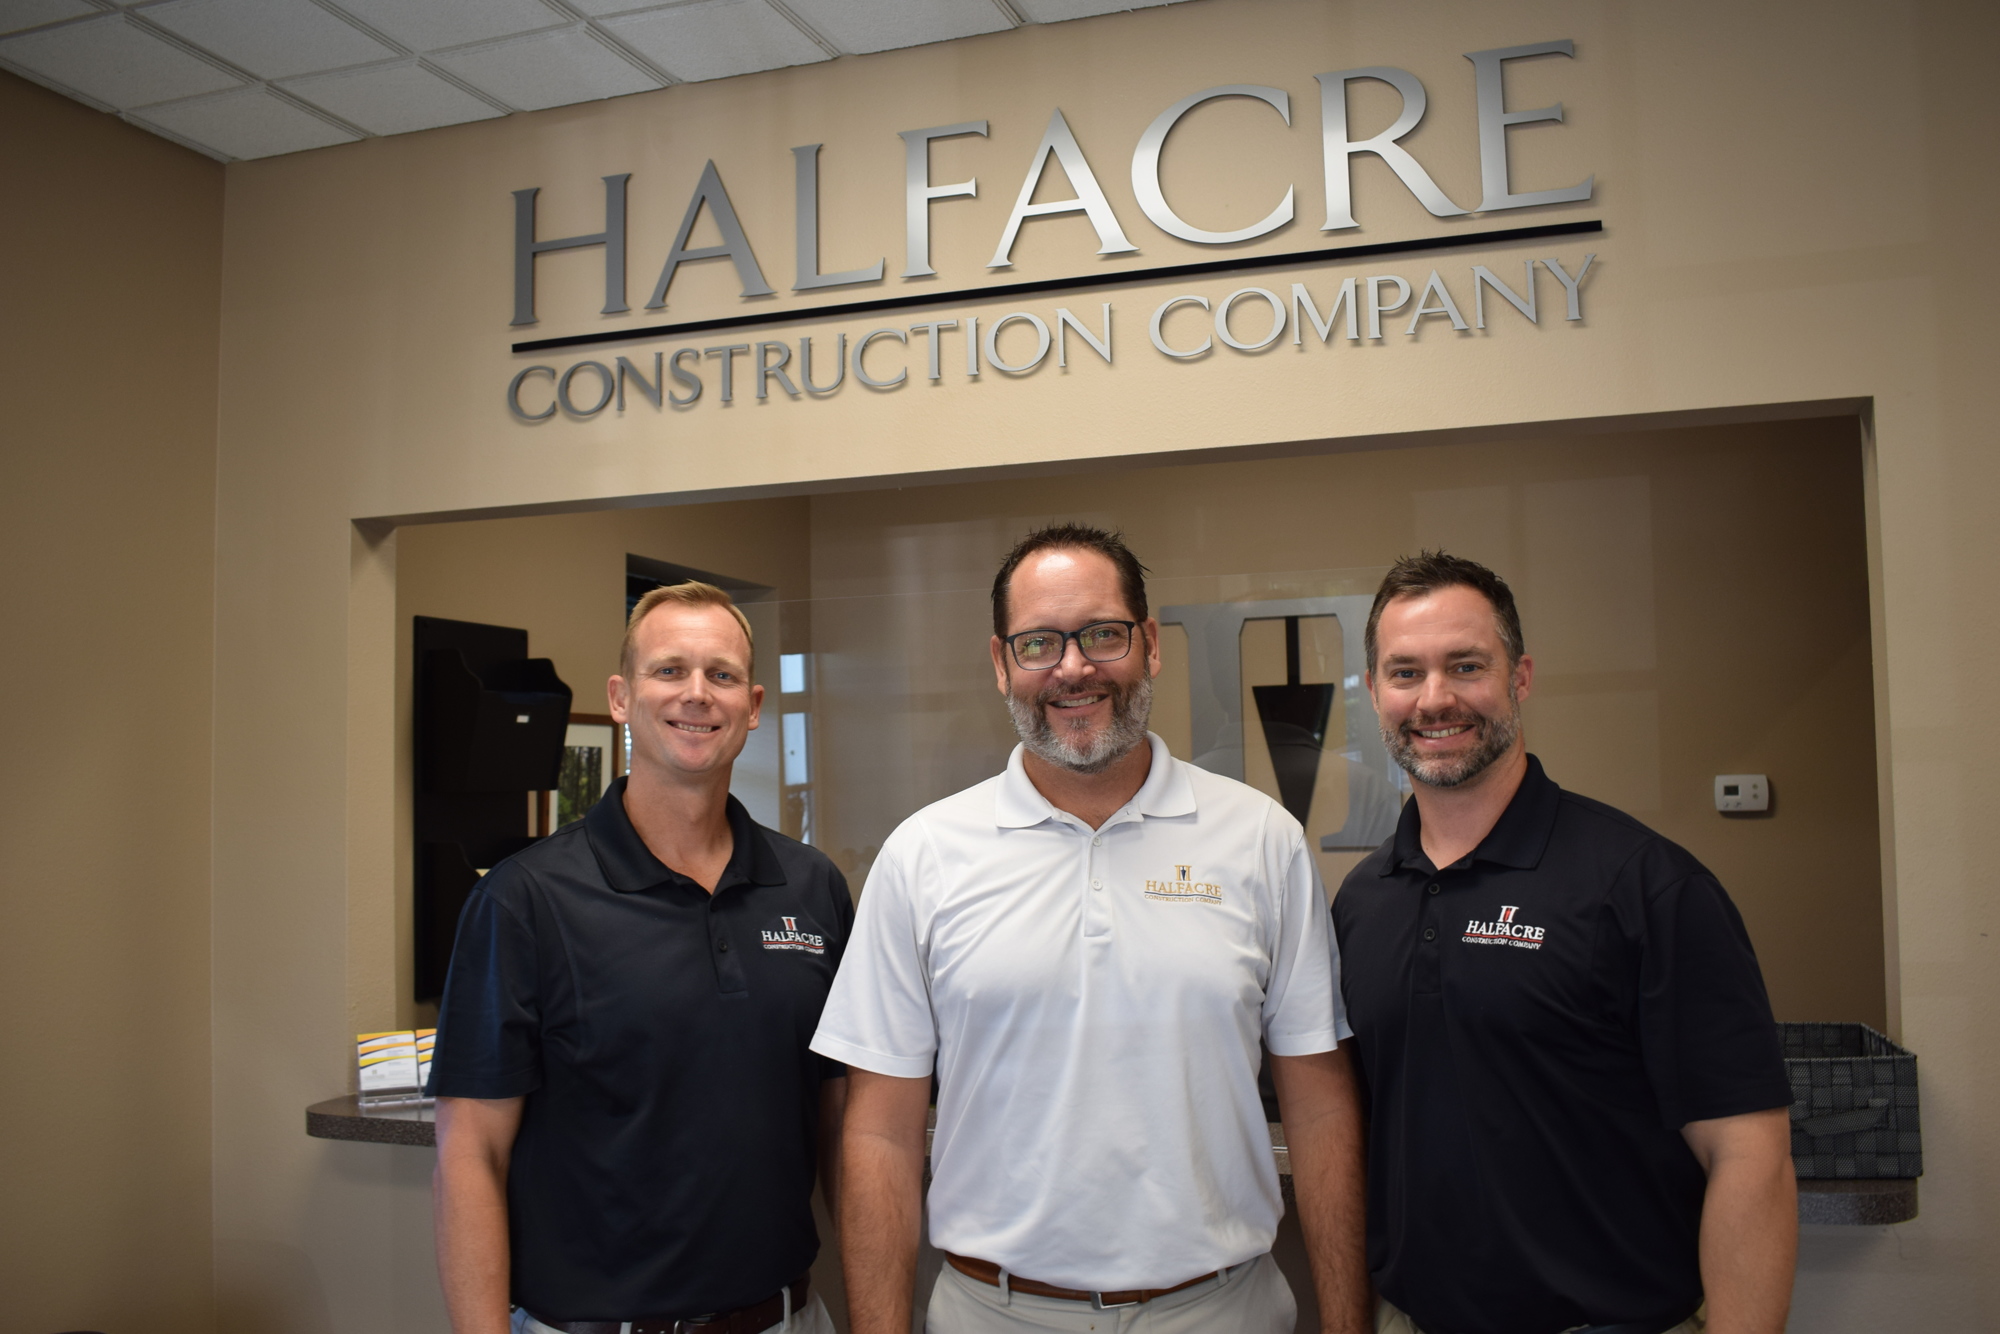 Tom Rees, Reed Giasson and Greg Witt all moved up through the ranks at Halfacre Construction and have been with the firm 16 years or more. By Jay Heater